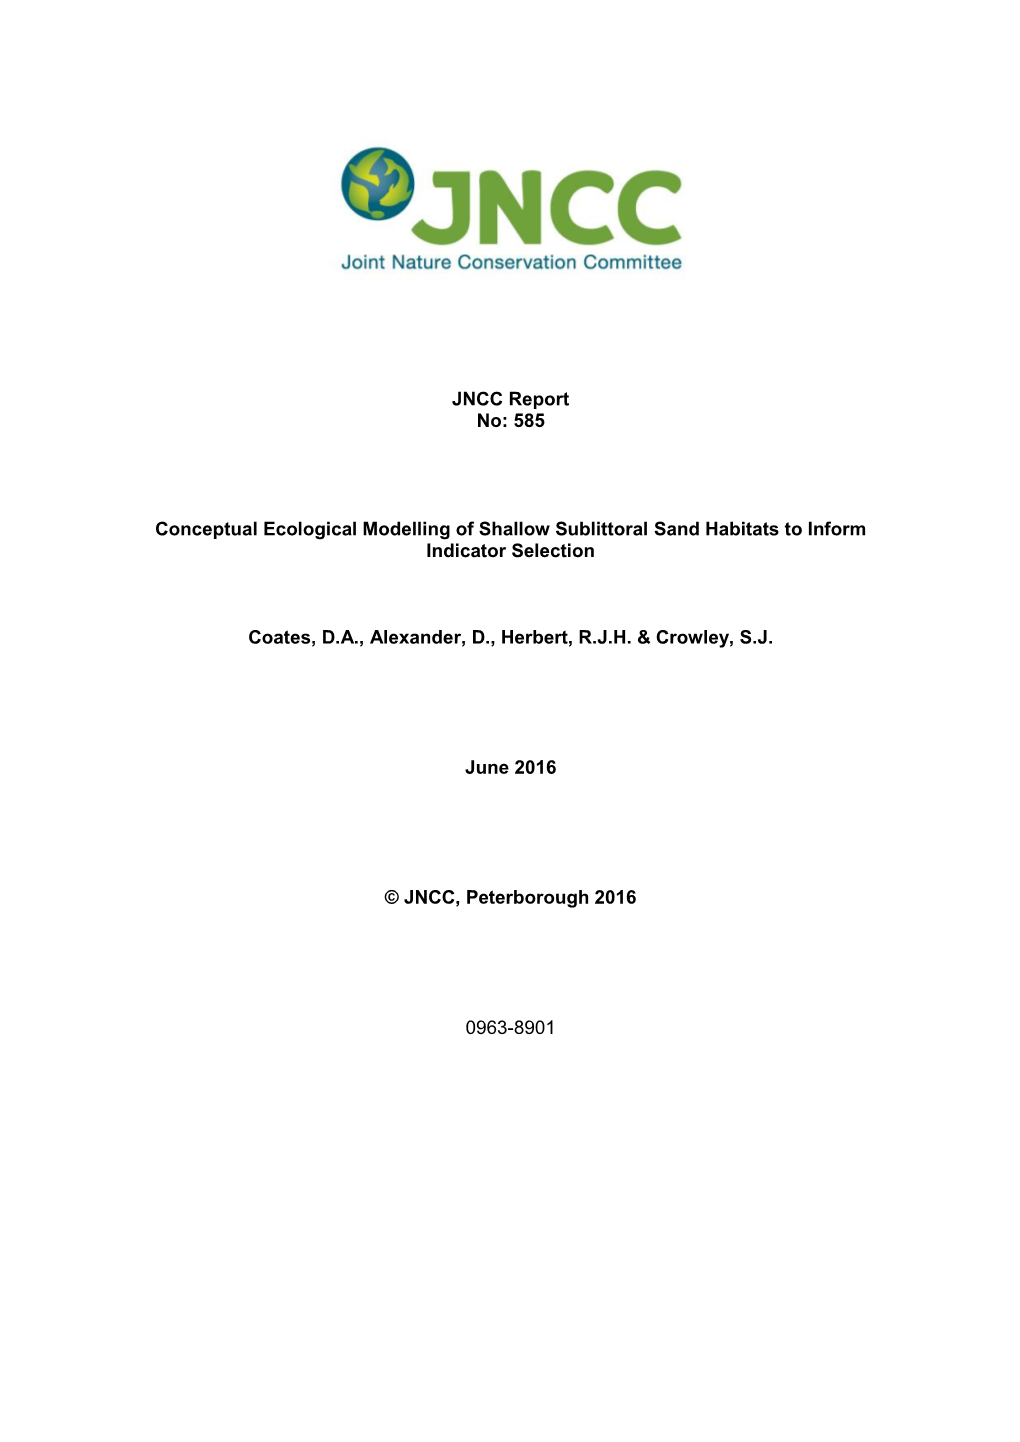 JNCC Report No. 585: Conceptual Ecological Modelling of Shallow